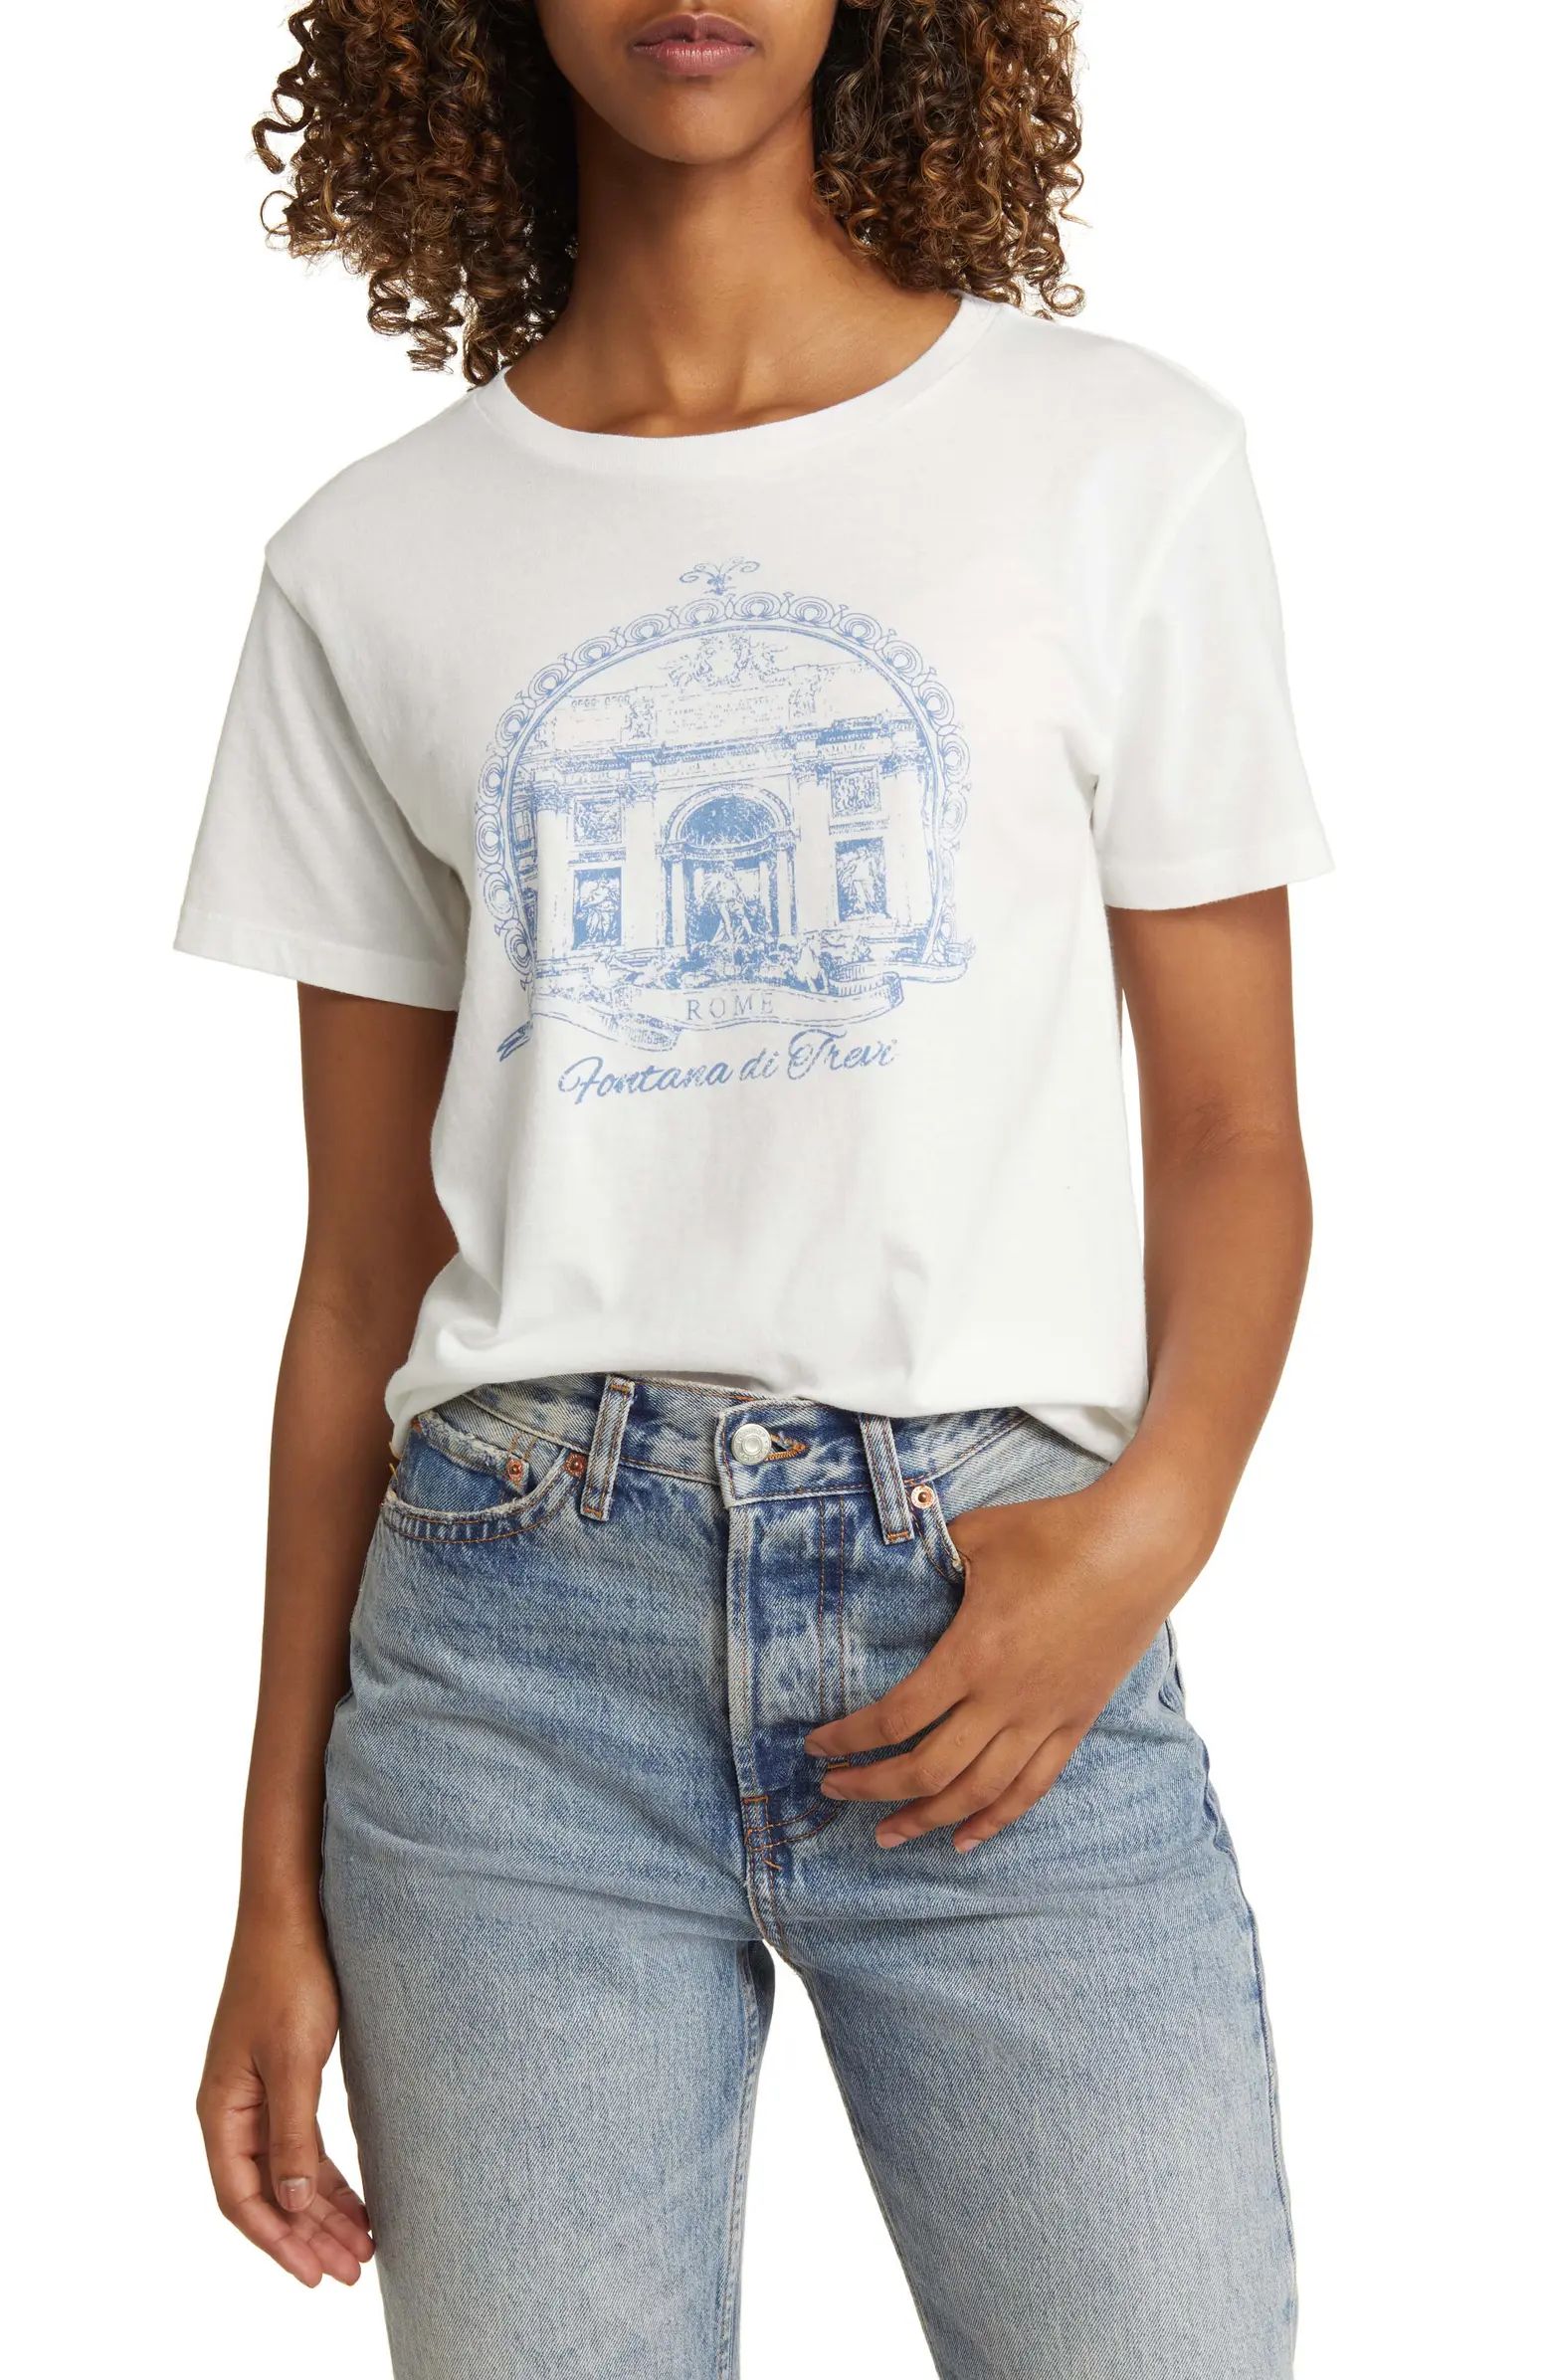 Trevi Fountain Graphic T-Shirt | Nordstrom